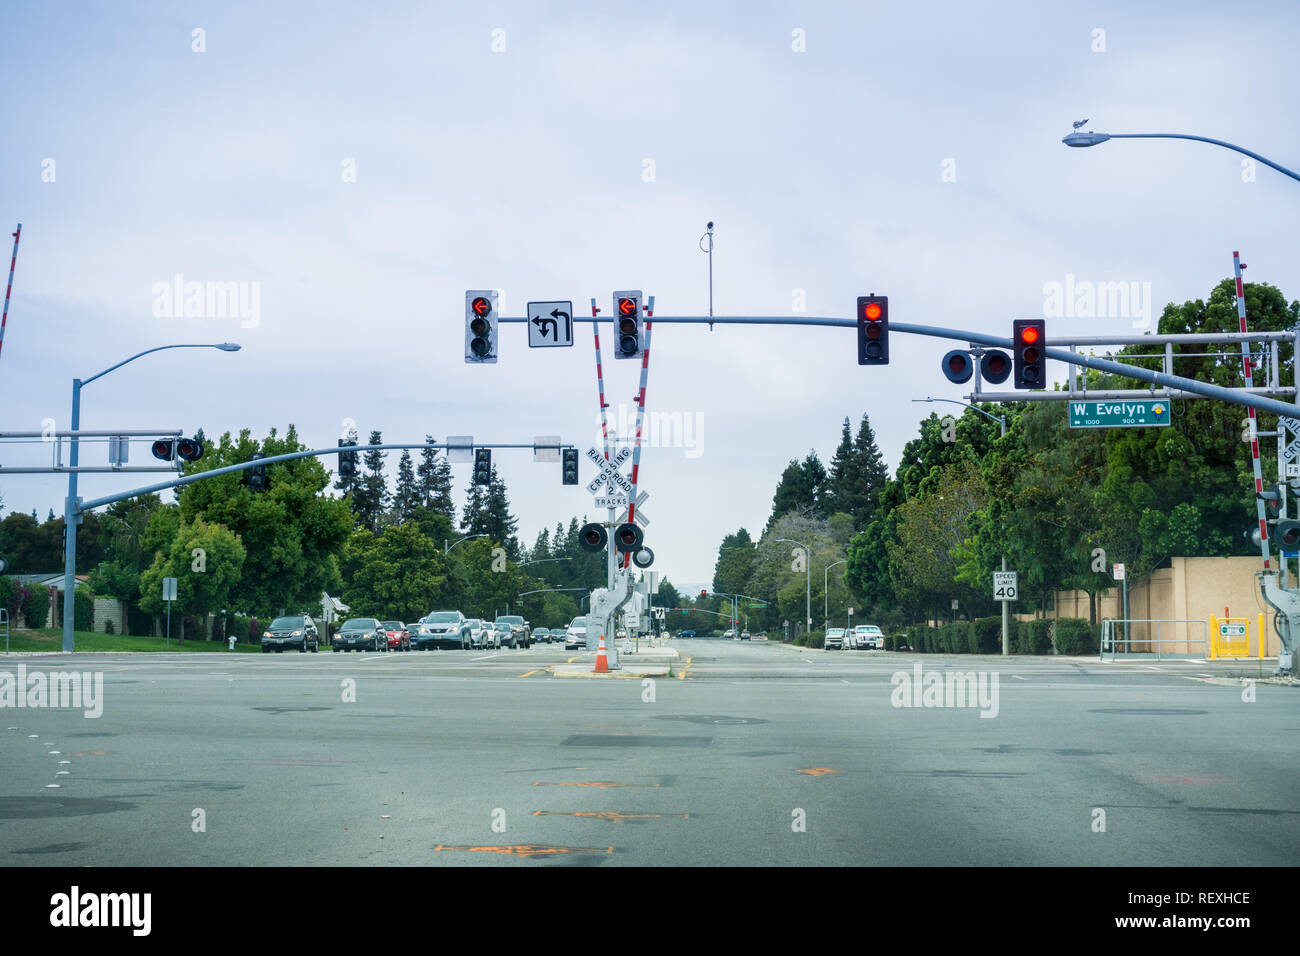 August 3, 2017 Sunnyvale/CA/USA - Railway crossing at a street junction near a residential neighborhood in Silicon Valley Stock Photo